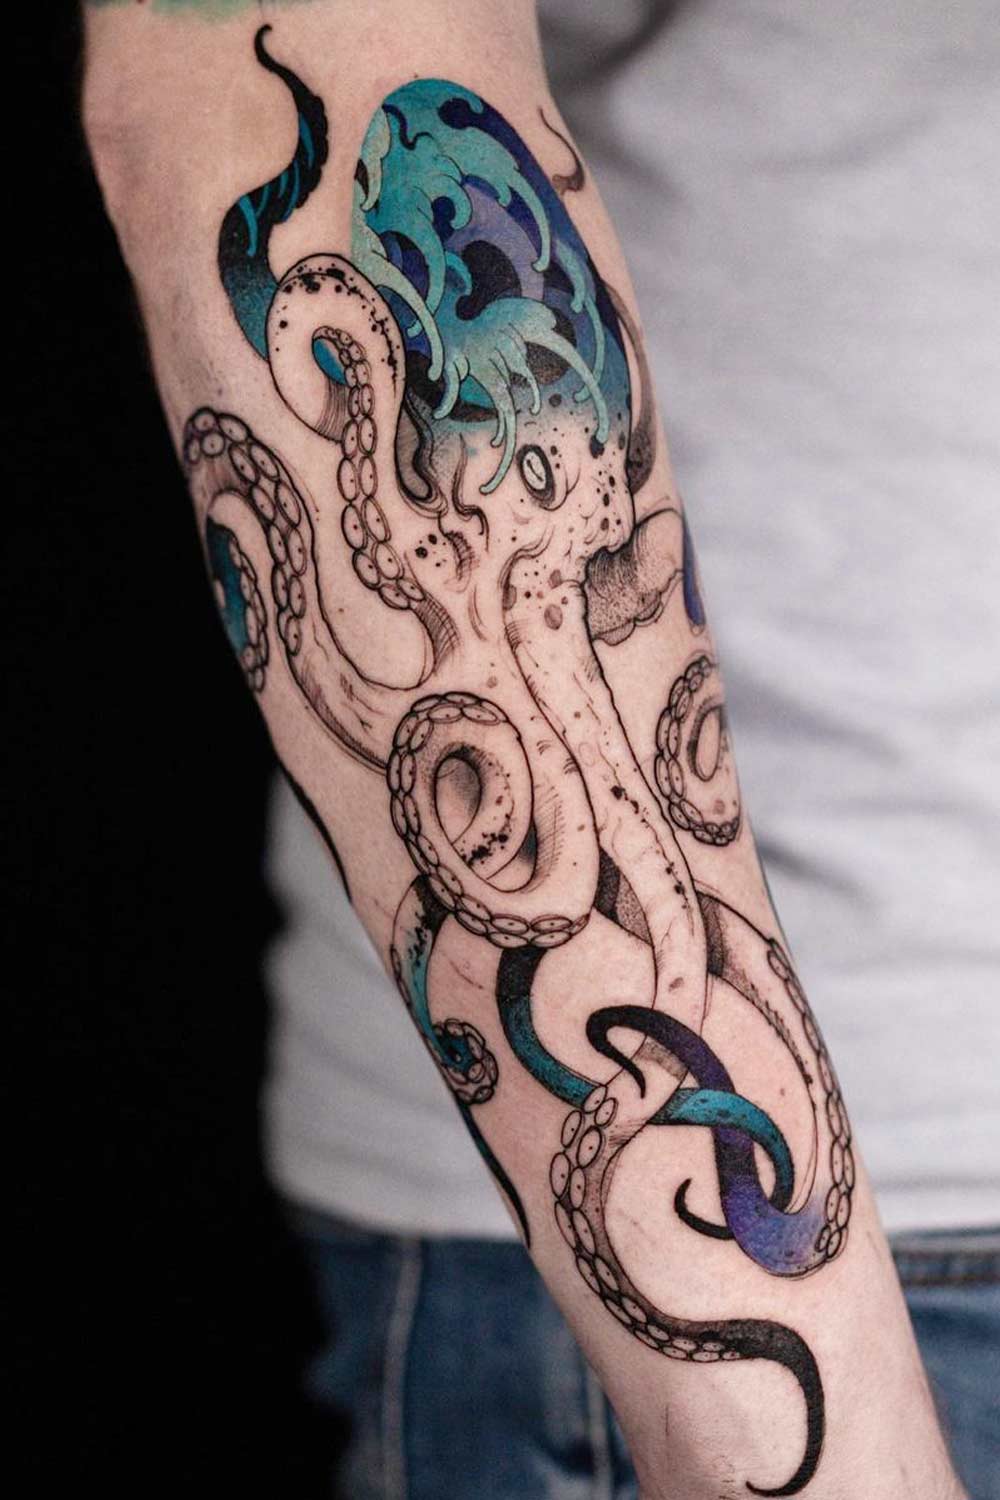 Black and White Octopus Tattoos with Colorful Elements